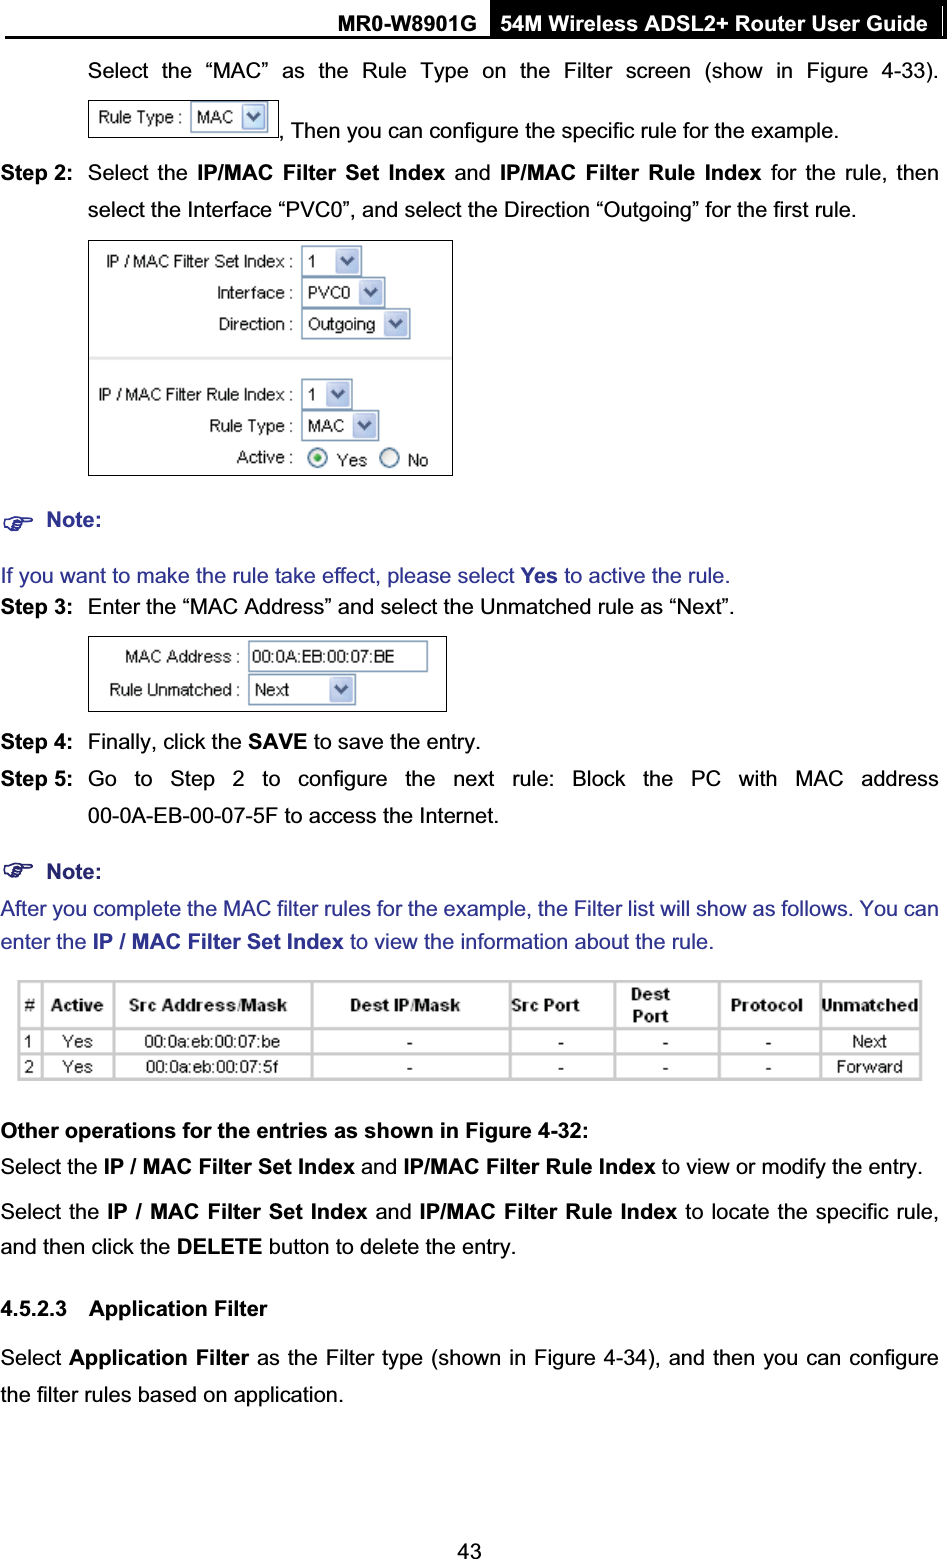 MR0-W8901G 54M Wireless ADSL2+ Router User Guide43Select the “MAC” as the Rule Type on the Filter screen (show in Figure 4-33). , Then you can configure the specific rule for the example. Step 2:  Select the IP/MAC Filter Set Index and IP/MAC Filter Rule Index for the rule, then select the Interface “PVC0”, and select the Direction “Outgoing” for the first rule. )Note:If you want to make the rule take effect, please select Yes to active the rule. Step 3:  Enter the “MAC Address” and select the Unmatched rule as “Next”. Step 4:  Finally, click the SAVE to save the entry.Step 5:  Go to Step 2 to configure the next rule: Block the PC with MAC address 00-0A-EB-00-07-5F to access the Internet.)Note:After you complete the MAC filter rules for the example, the Filter list will show as follows. You can enter the IP / MAC Filter Set Index to view the information about the rule. Other operations for the entries as shown in Figure 4-32: Select the IP / MAC Filter Set Index and IP/MAC Filter Rule Index to view or modify the entry. Select the IP / MAC Filter Set Index and IP/MAC Filter Rule Index to locate the specific rule, and then click the DELETE button to delete the entry. 4.5.2.3 Application Filter Select Application Filter as the Filter type (shown in Figure 4-34), and then you can configure the filter rules based on application. 